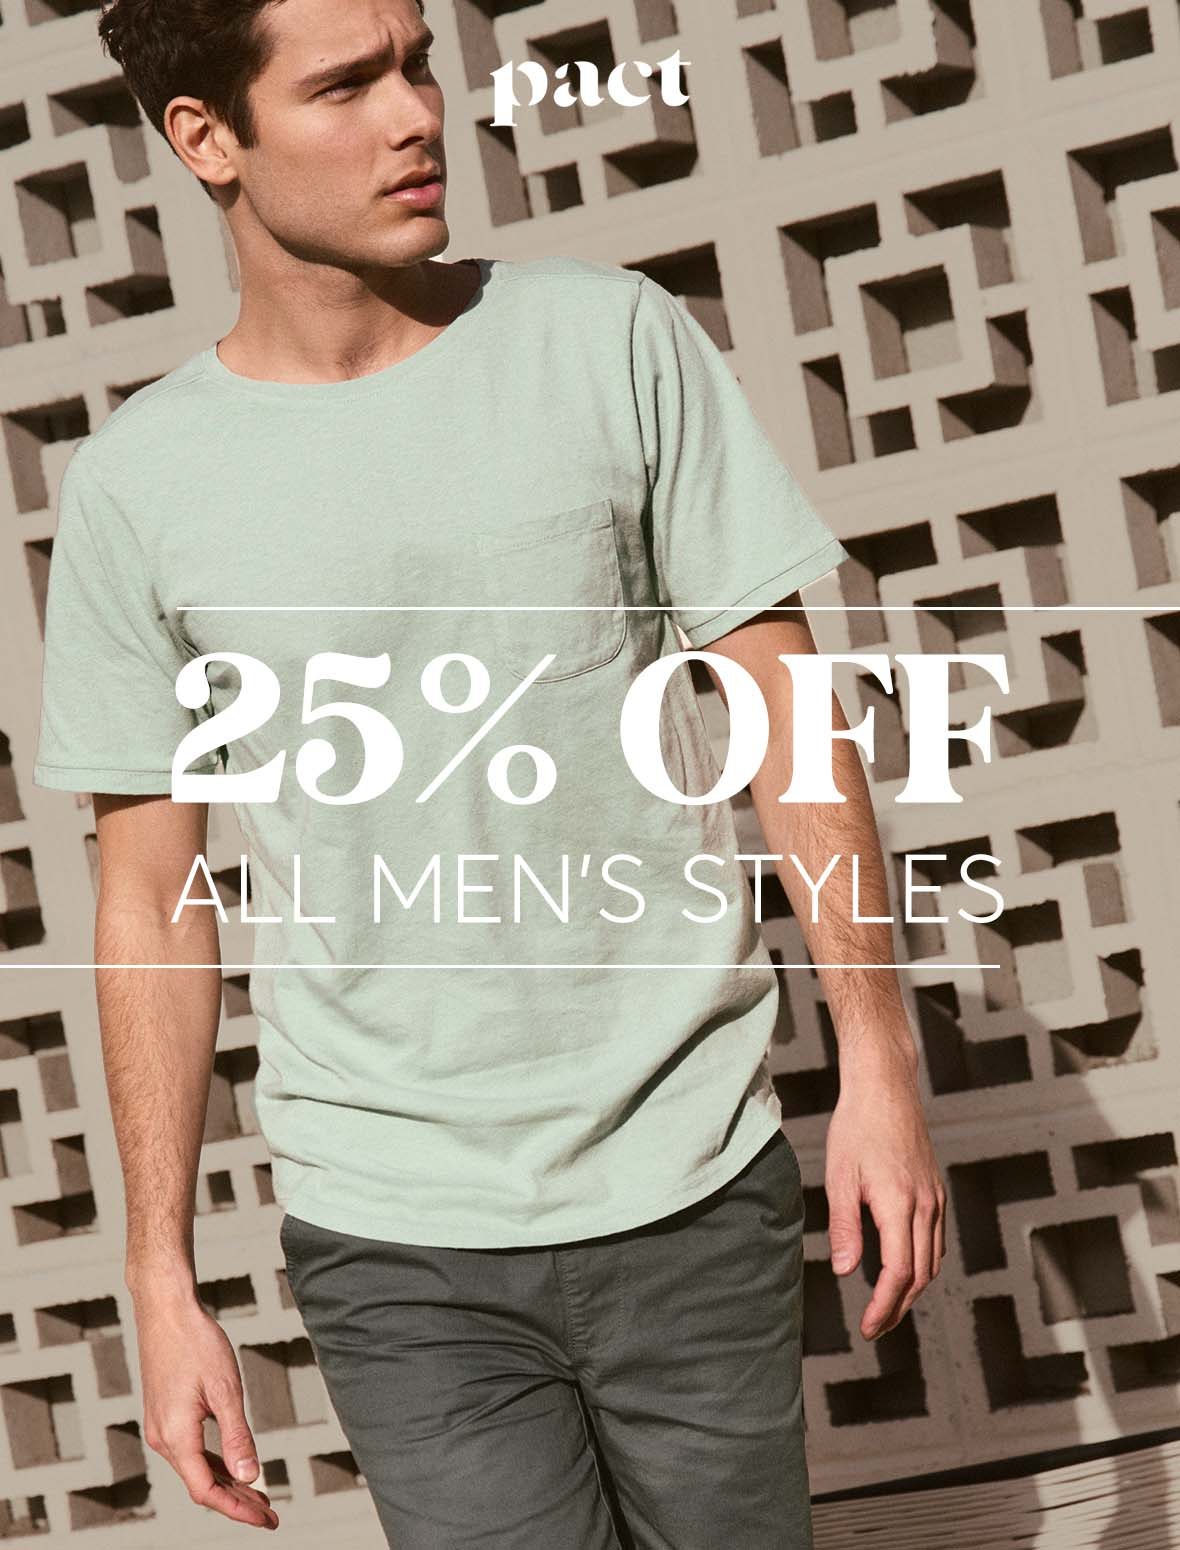 All men's styles 25% off.